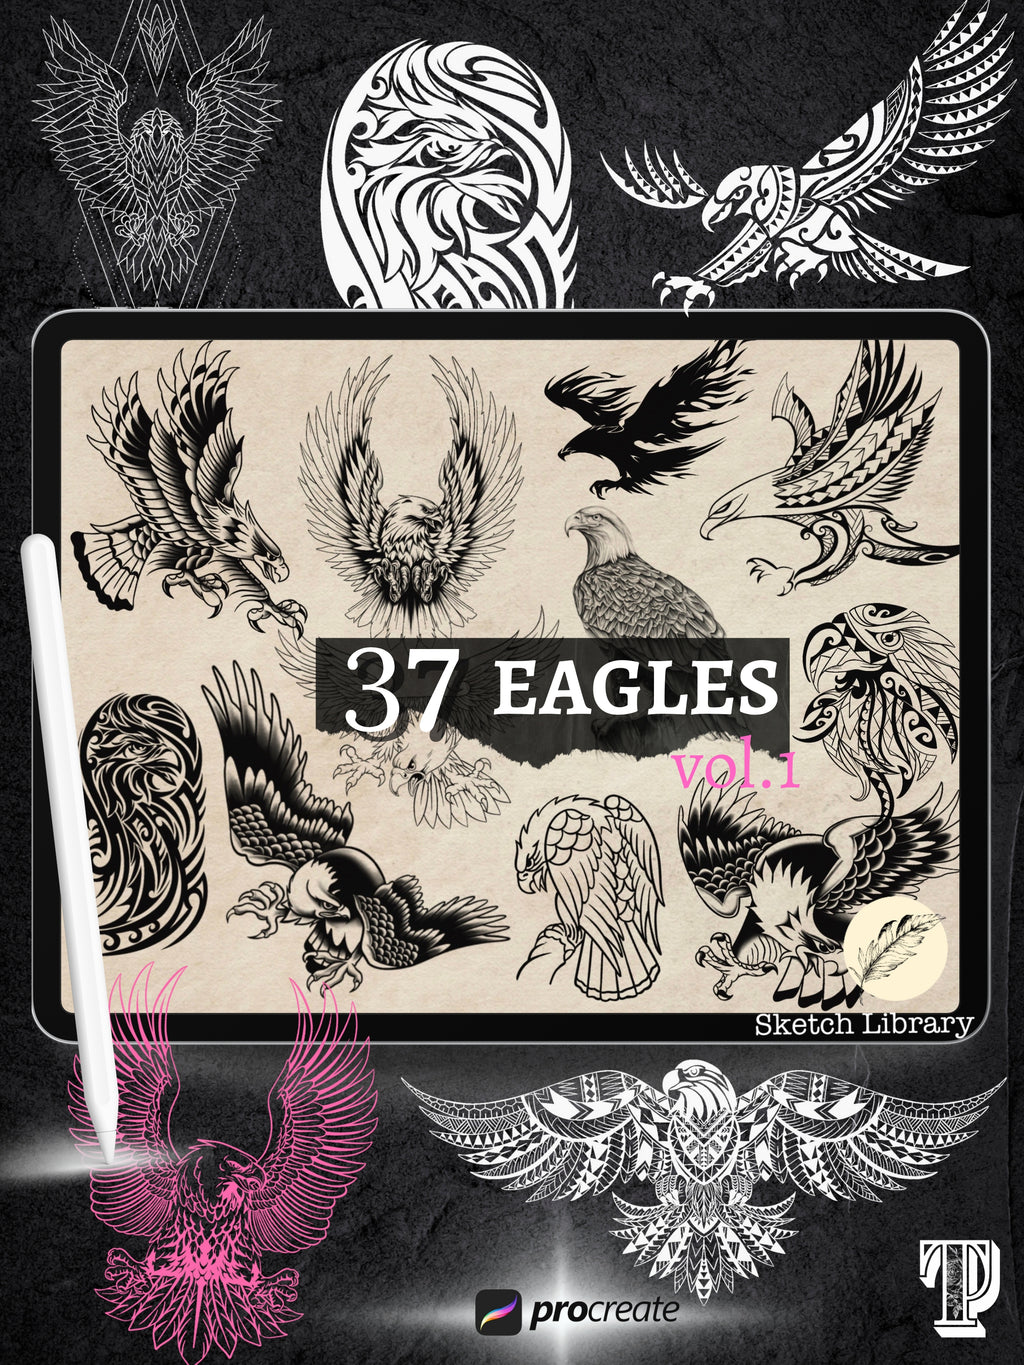 37 Eagles tattoo brushes for Procreate, stamps, outline for tattoo stencil, old school, polynesian, tribal, ipad, ipad pro